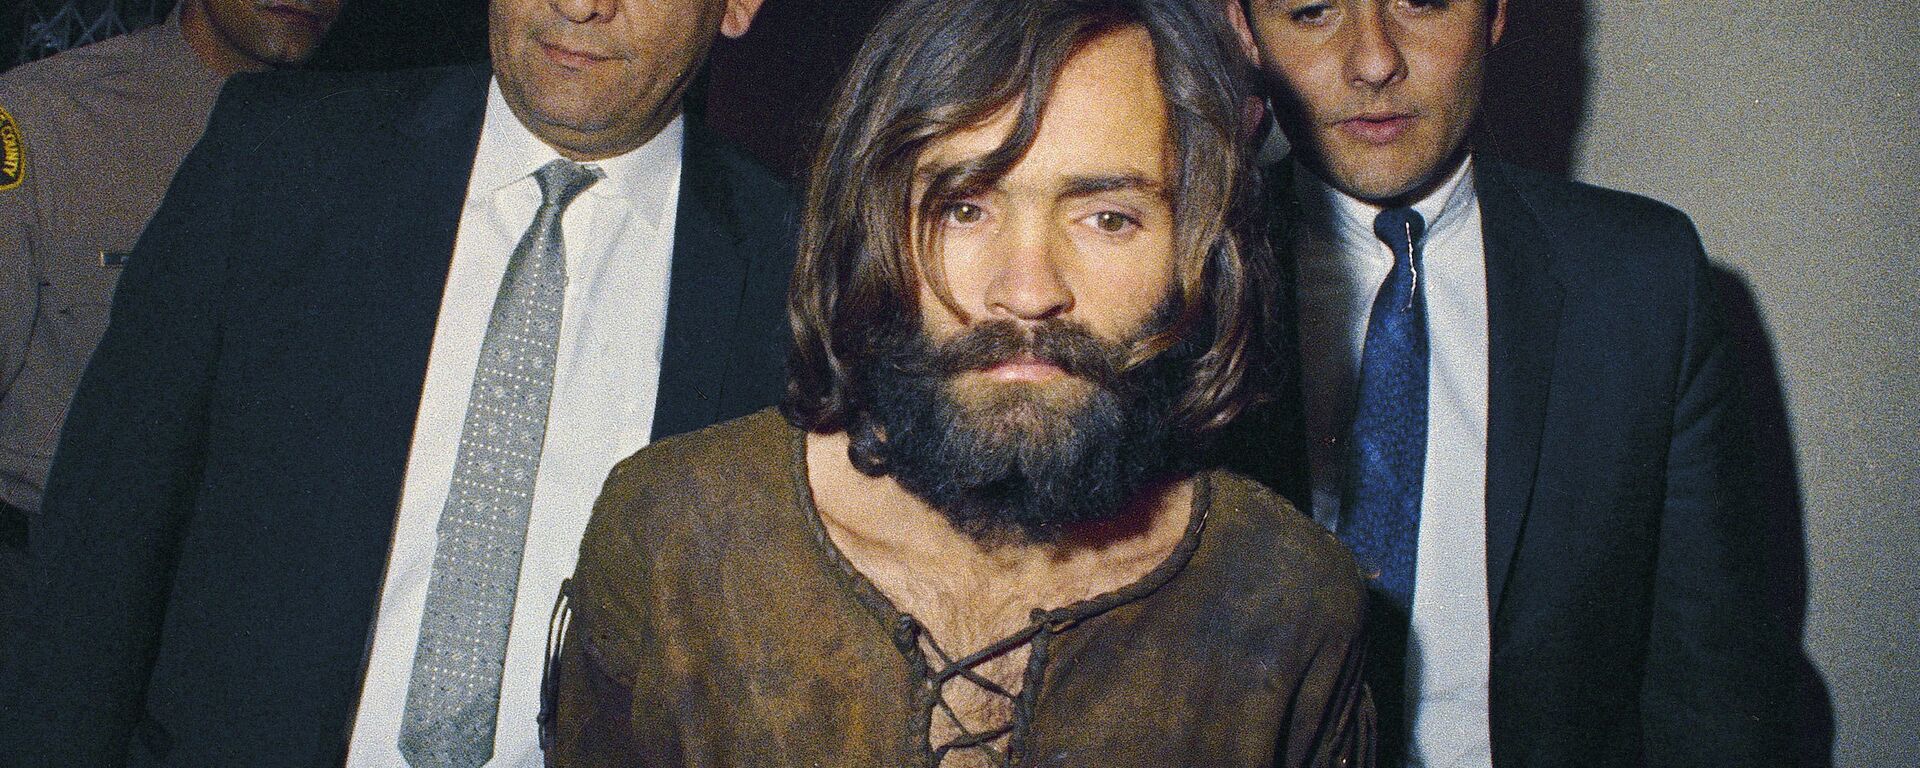 In this 1969 file photo, Charles Manson is escorted to his arraignment on conspiracy-murder charges in connection with the Sharon Tate murder case - Sputnik International, 1920, 20.11.2017